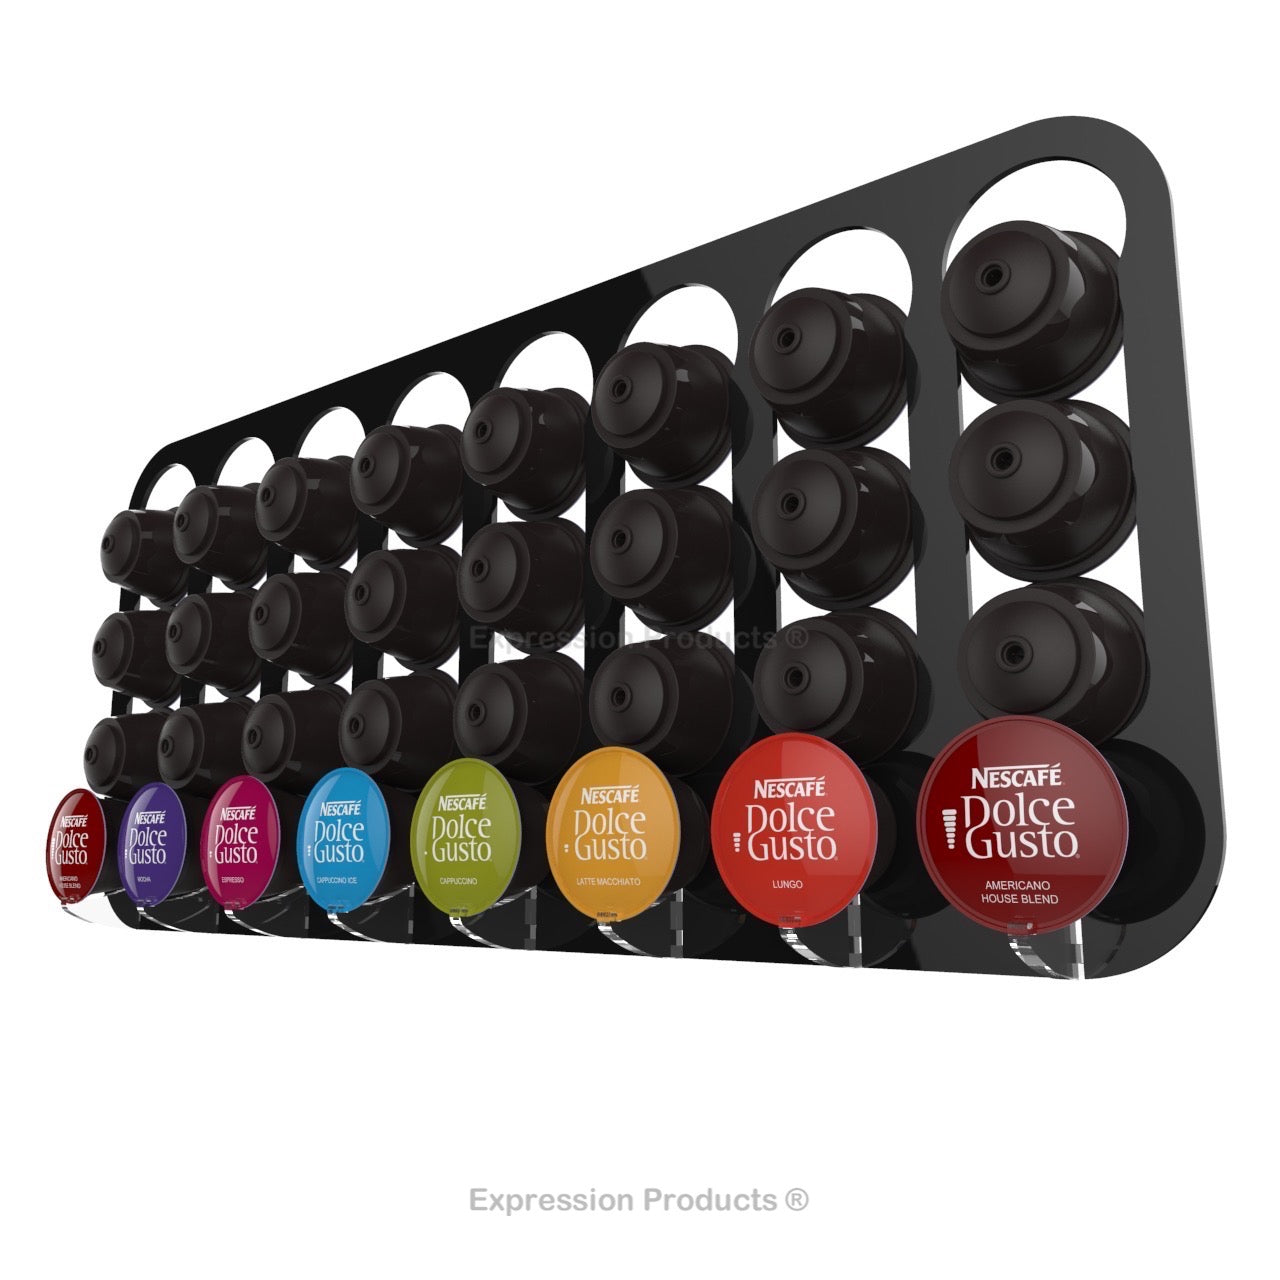 Dolce gusto coffee pod holder, wall mounted, half height.  Shown in black holding 32 pods